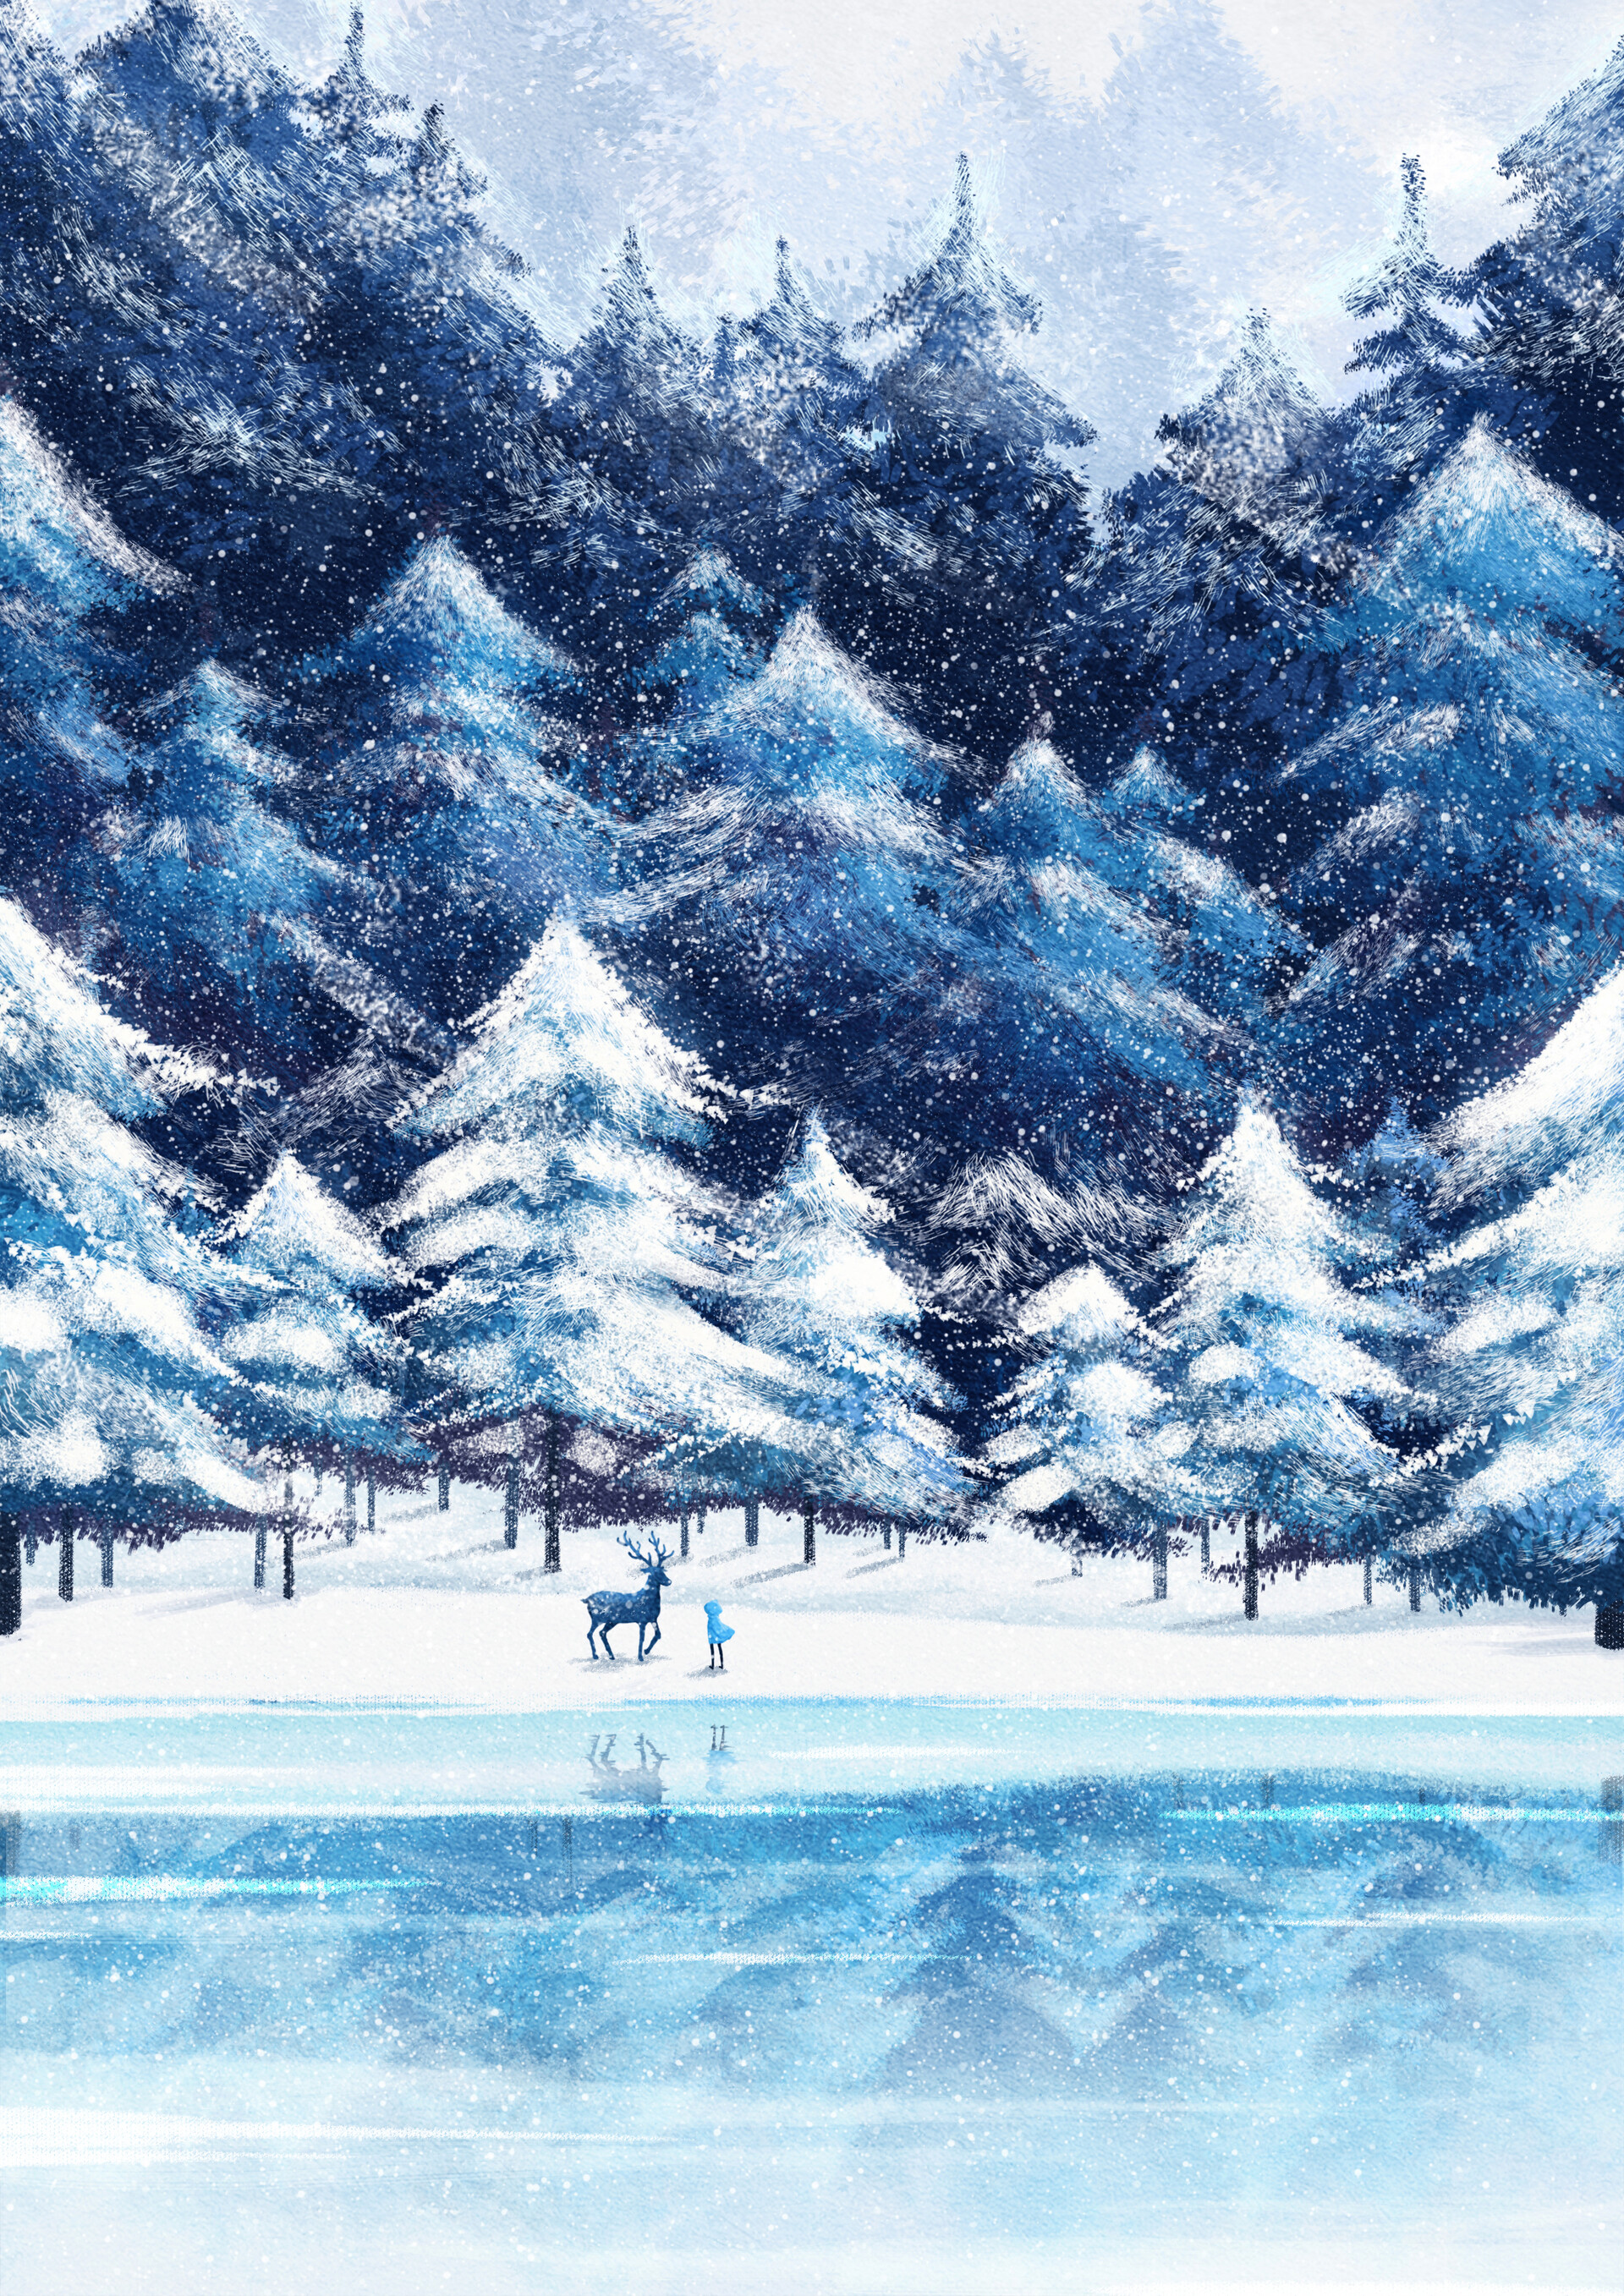 android art, deer, winter, snow, silhouette, forest